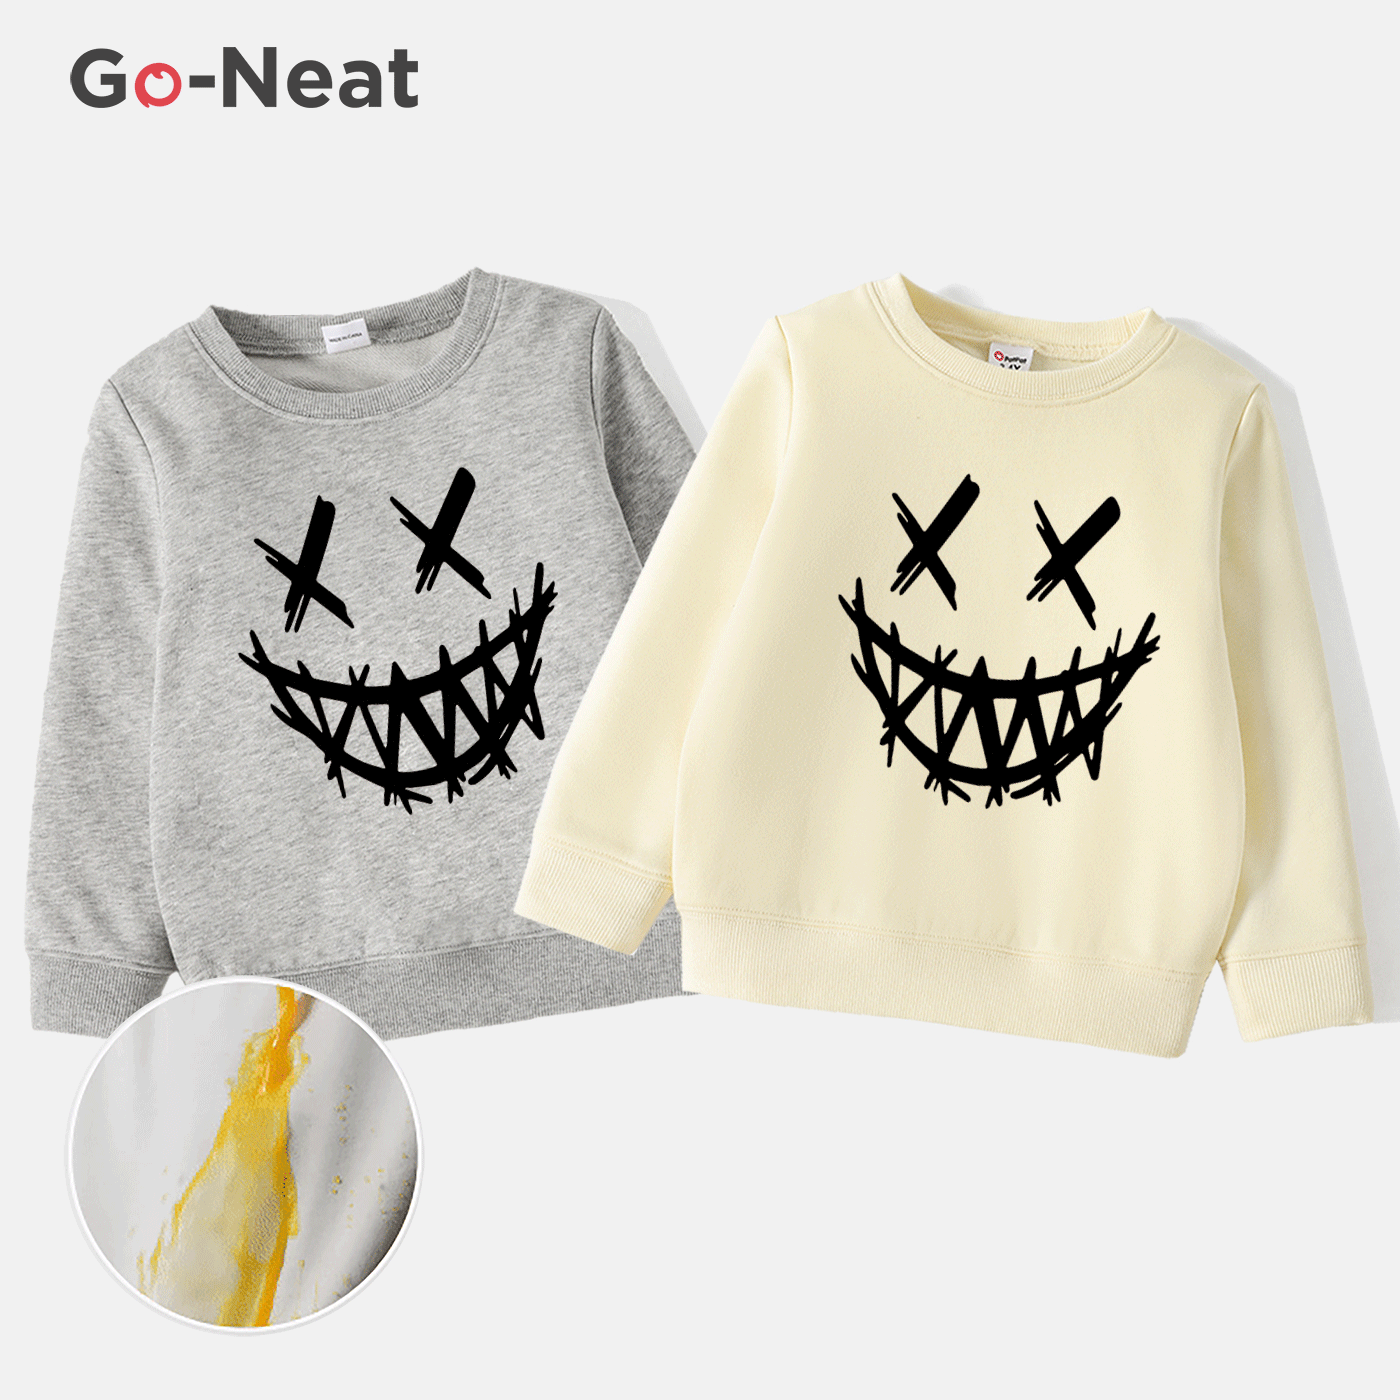 Go-Neat Water Repellent and Stain Resistant Sibling Matching Graphic Print Long-sleeve Sweatshirt